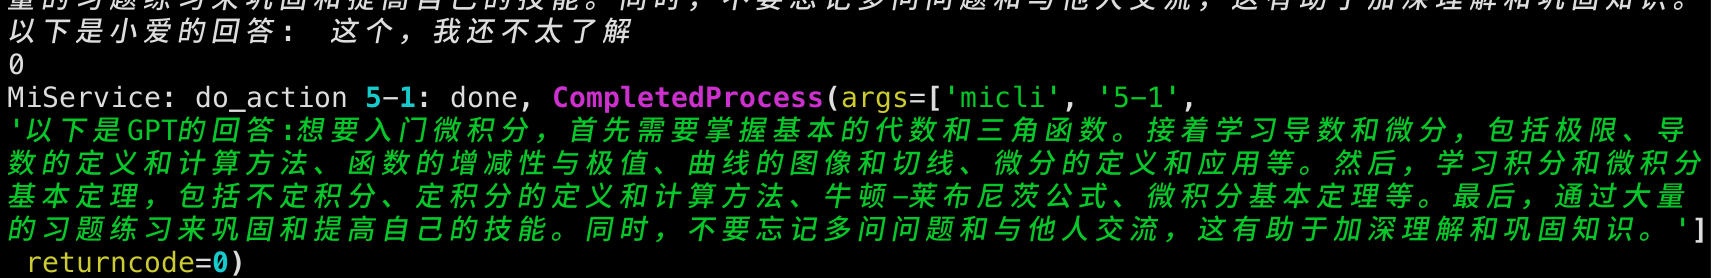 demo-picture-of-xiaogpt